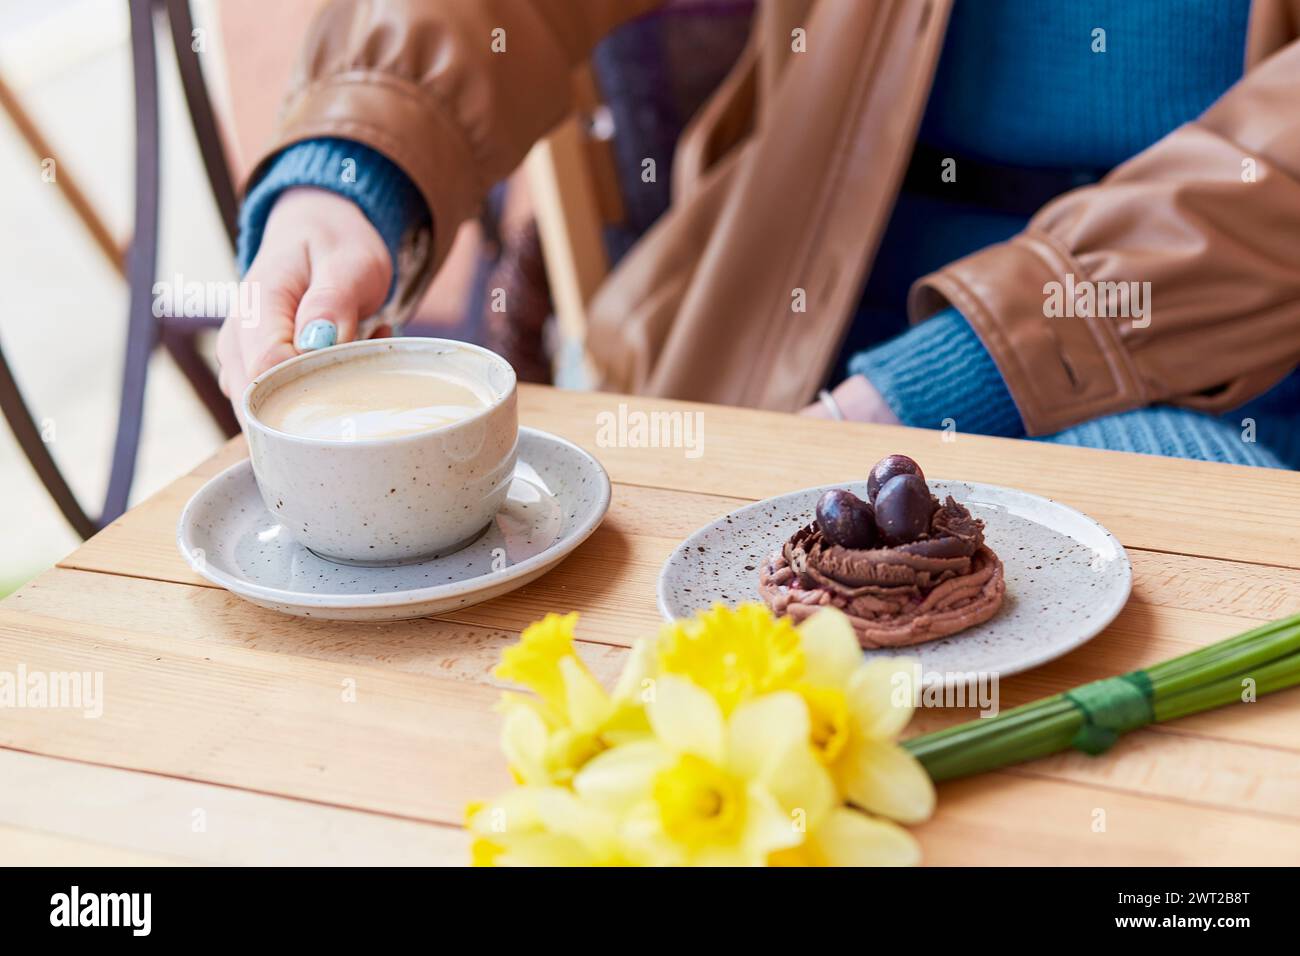 Sweet and floral - enjoying a cafe moment with cappucino, dessert and daffodils. Stock Photo